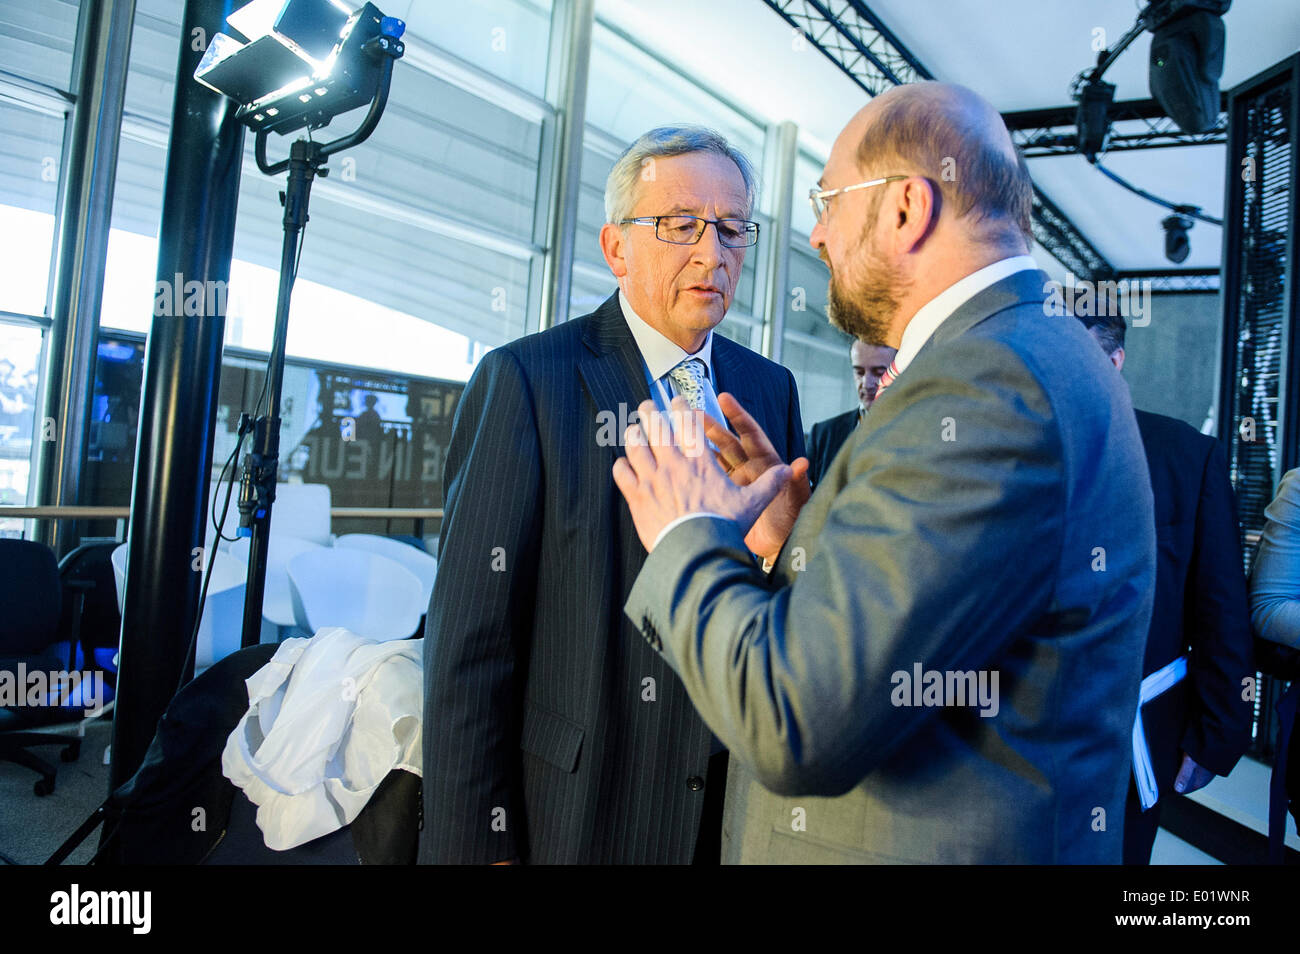 Brussels, Belgium. 29th April 2014. Martin Schulz (L), top candidate of the Party of European Socialists (PSE) and Jean-Claude Juncker, top candidate for European People's Party (EPP), talk ahead of Euranet's 'Big Crunch' Presidential debate at the EU parliament in BrusselsThe four top candidates for the presidency of the European Commission - Jean-Claude Juncker, Ska Keller, Martin Schulz and Guy Verhofstadt - attend EU-wide debate organized by EuranetPlus and focused on the major election topics. Credit:  dpa picture alliance/Alamy Live News Stock Photo